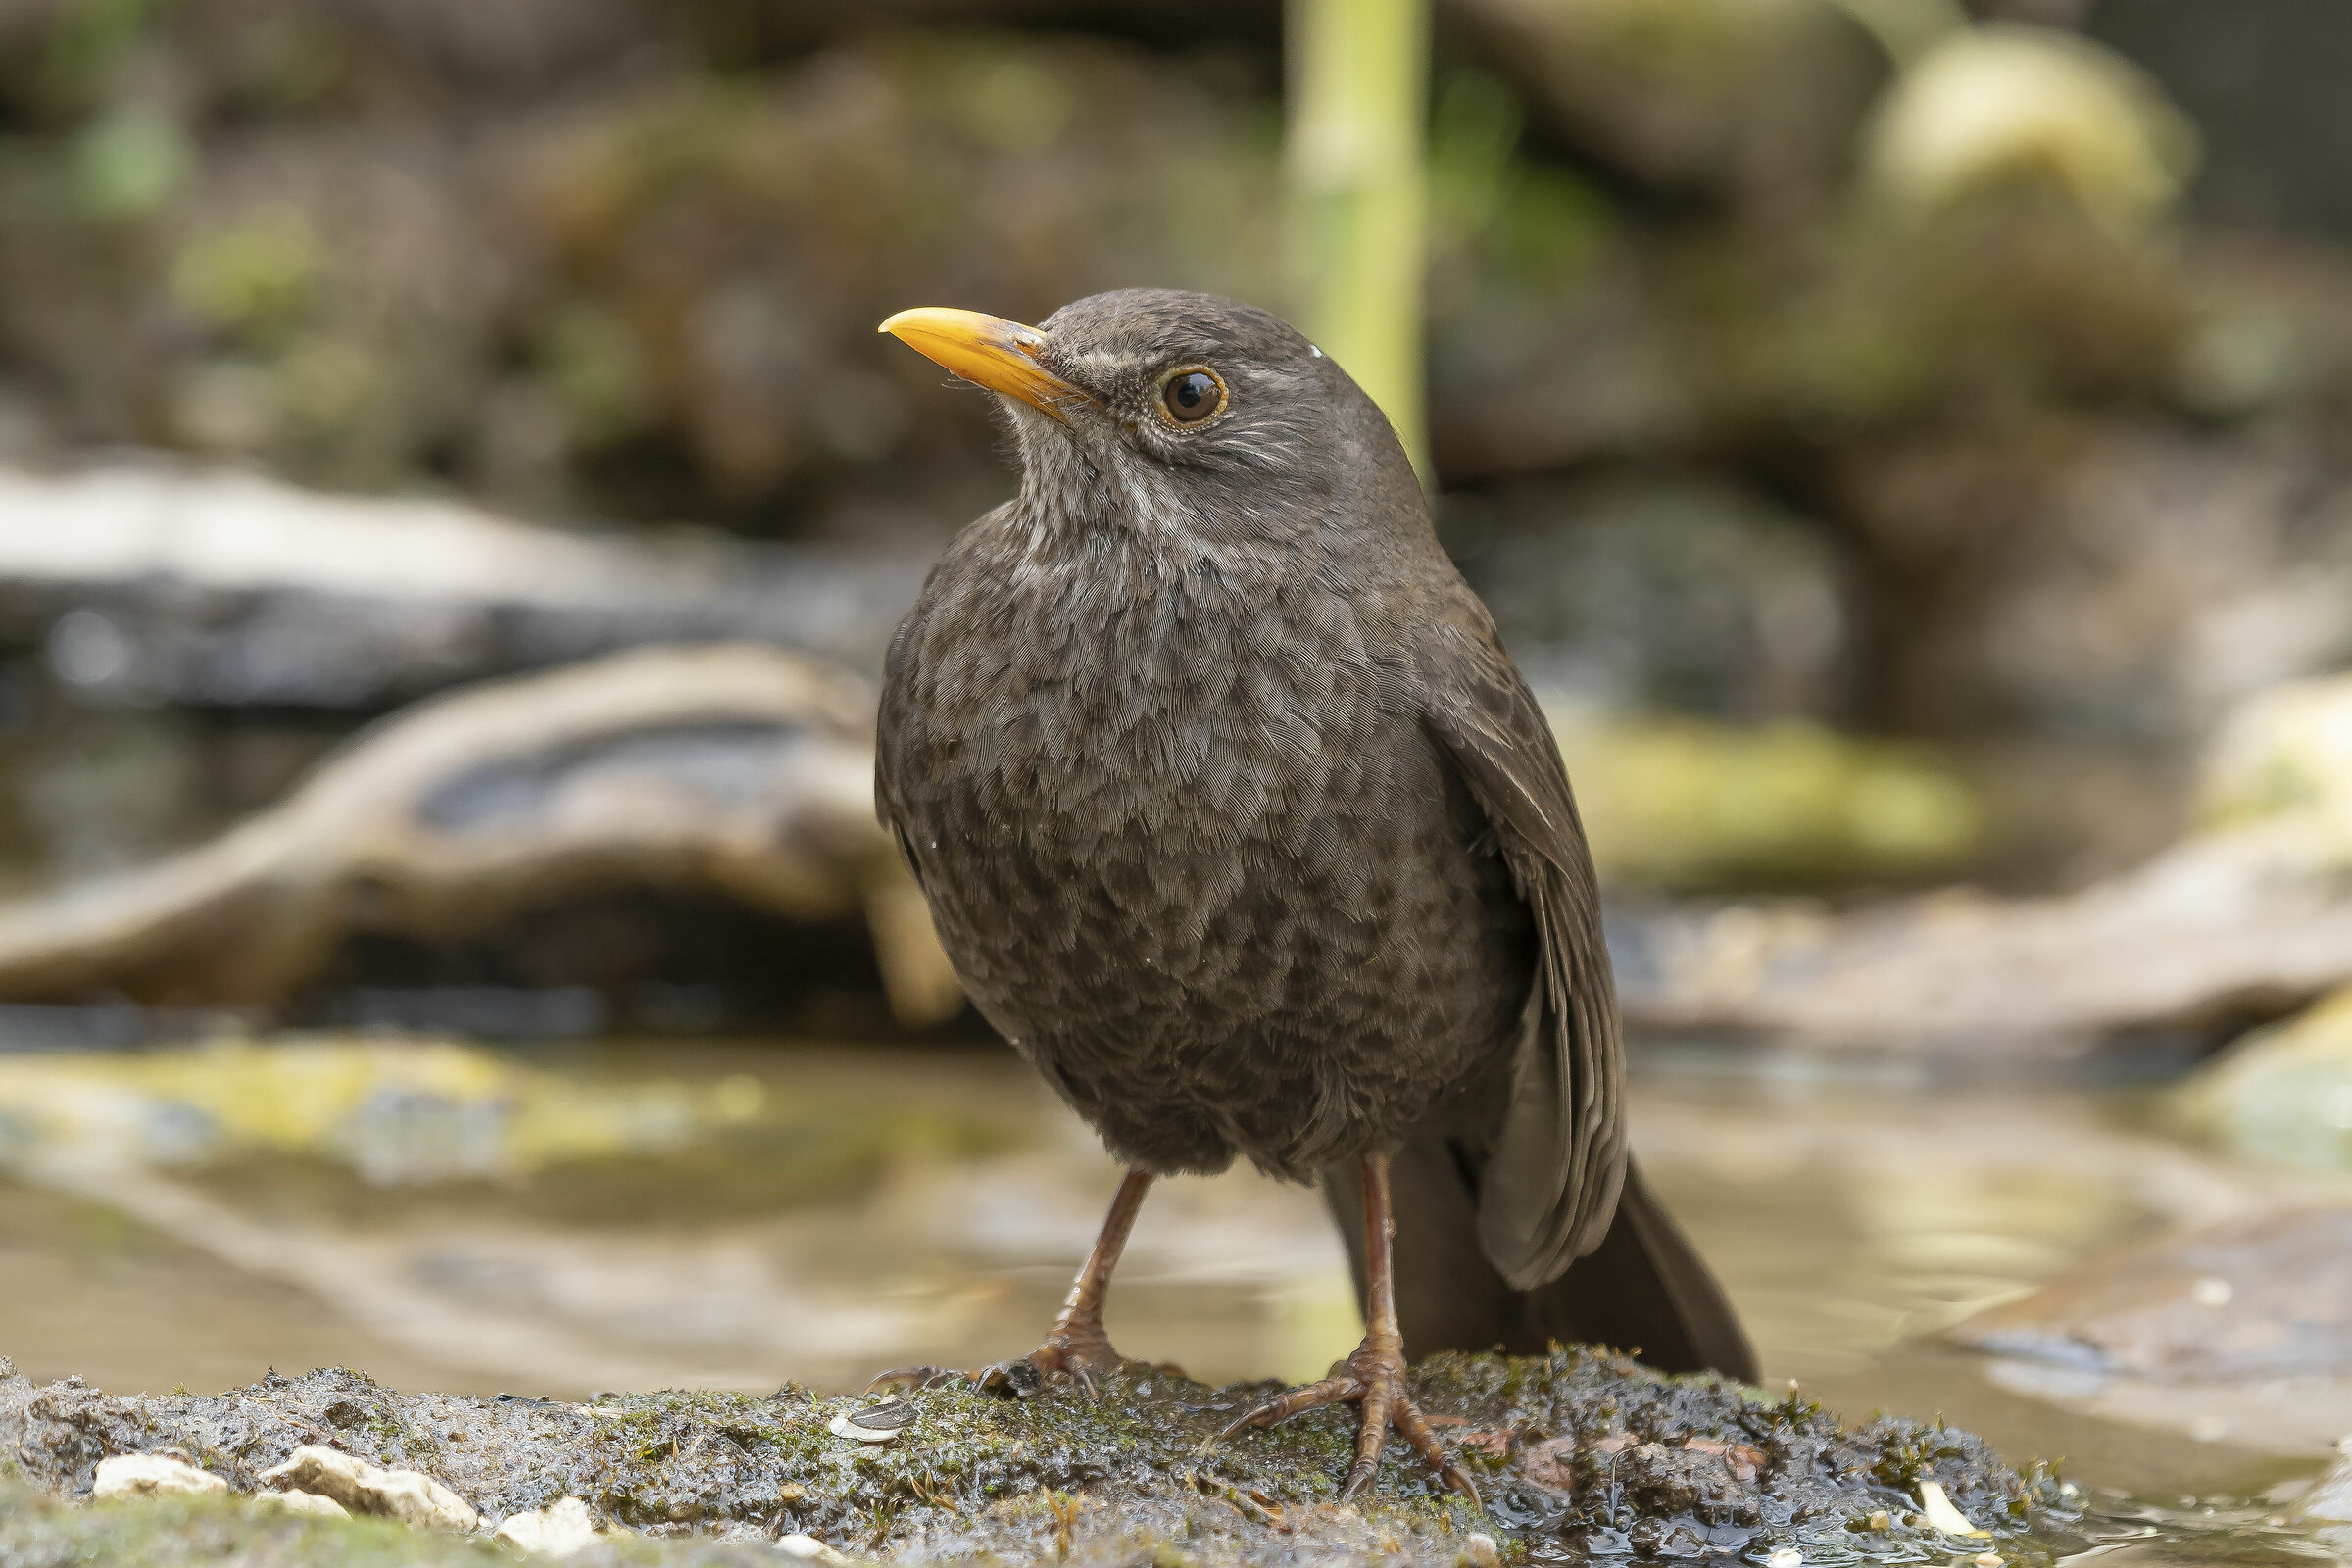 Immature Blackbird of about a year...